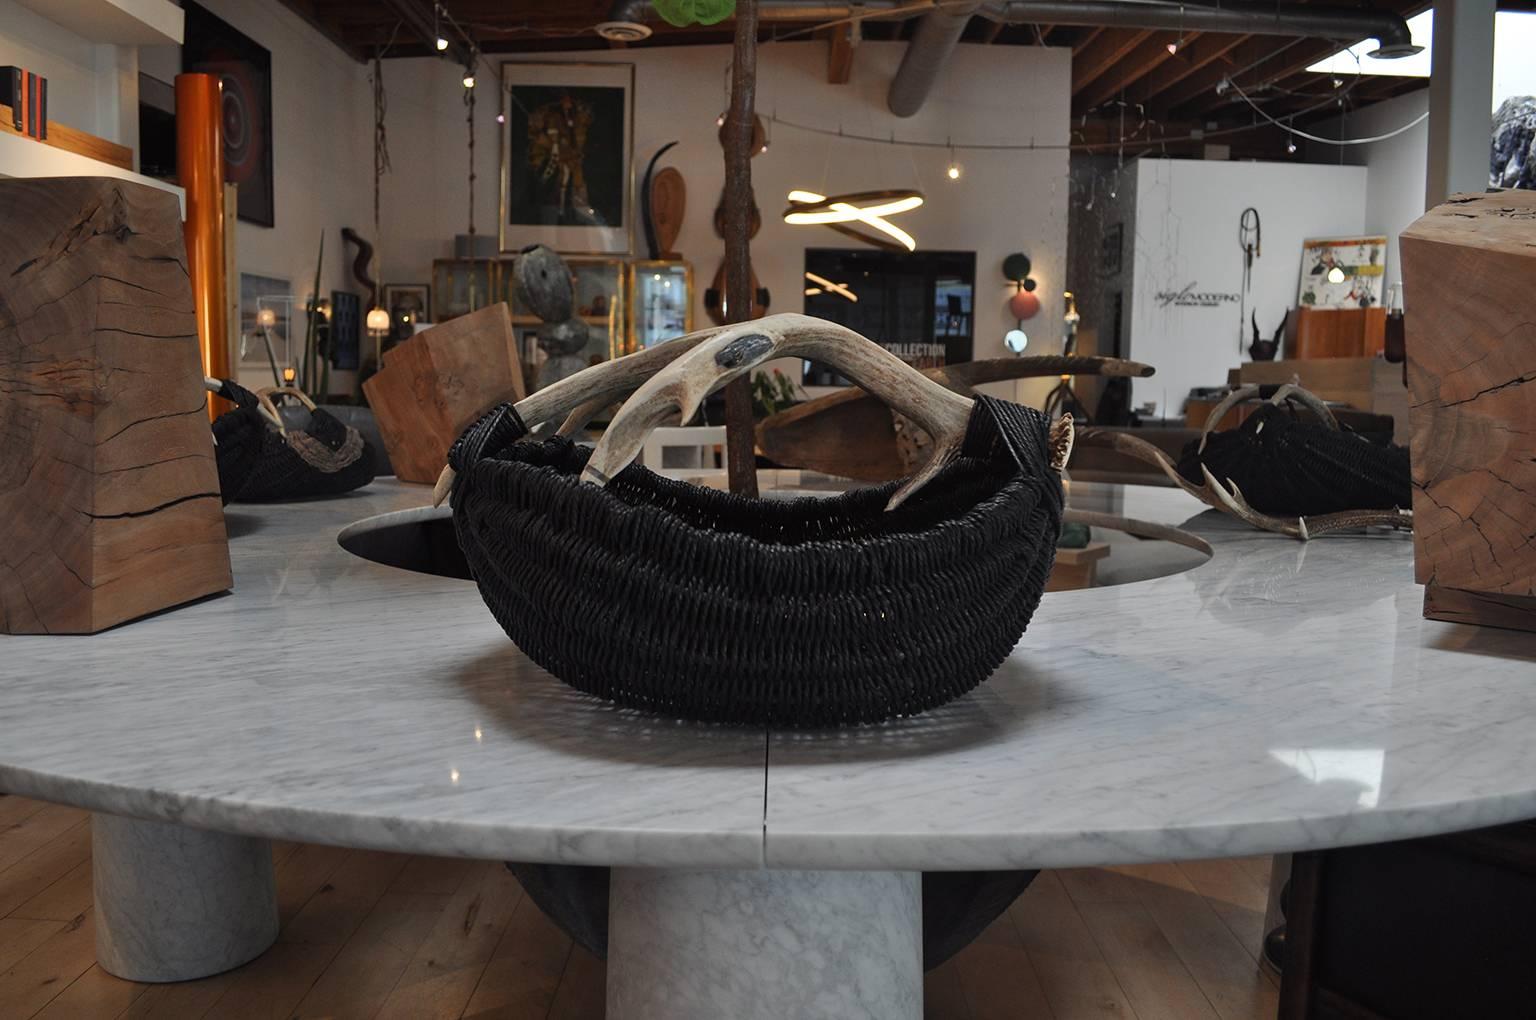 This large scale hand-made, custom, shed deer antler with an embedded blue kyanite stone, reed and Danish paper rope basket, is made by Los Angeles based Artist and Designer, Dax Savage. Having learned the art of antler basket weaving from his